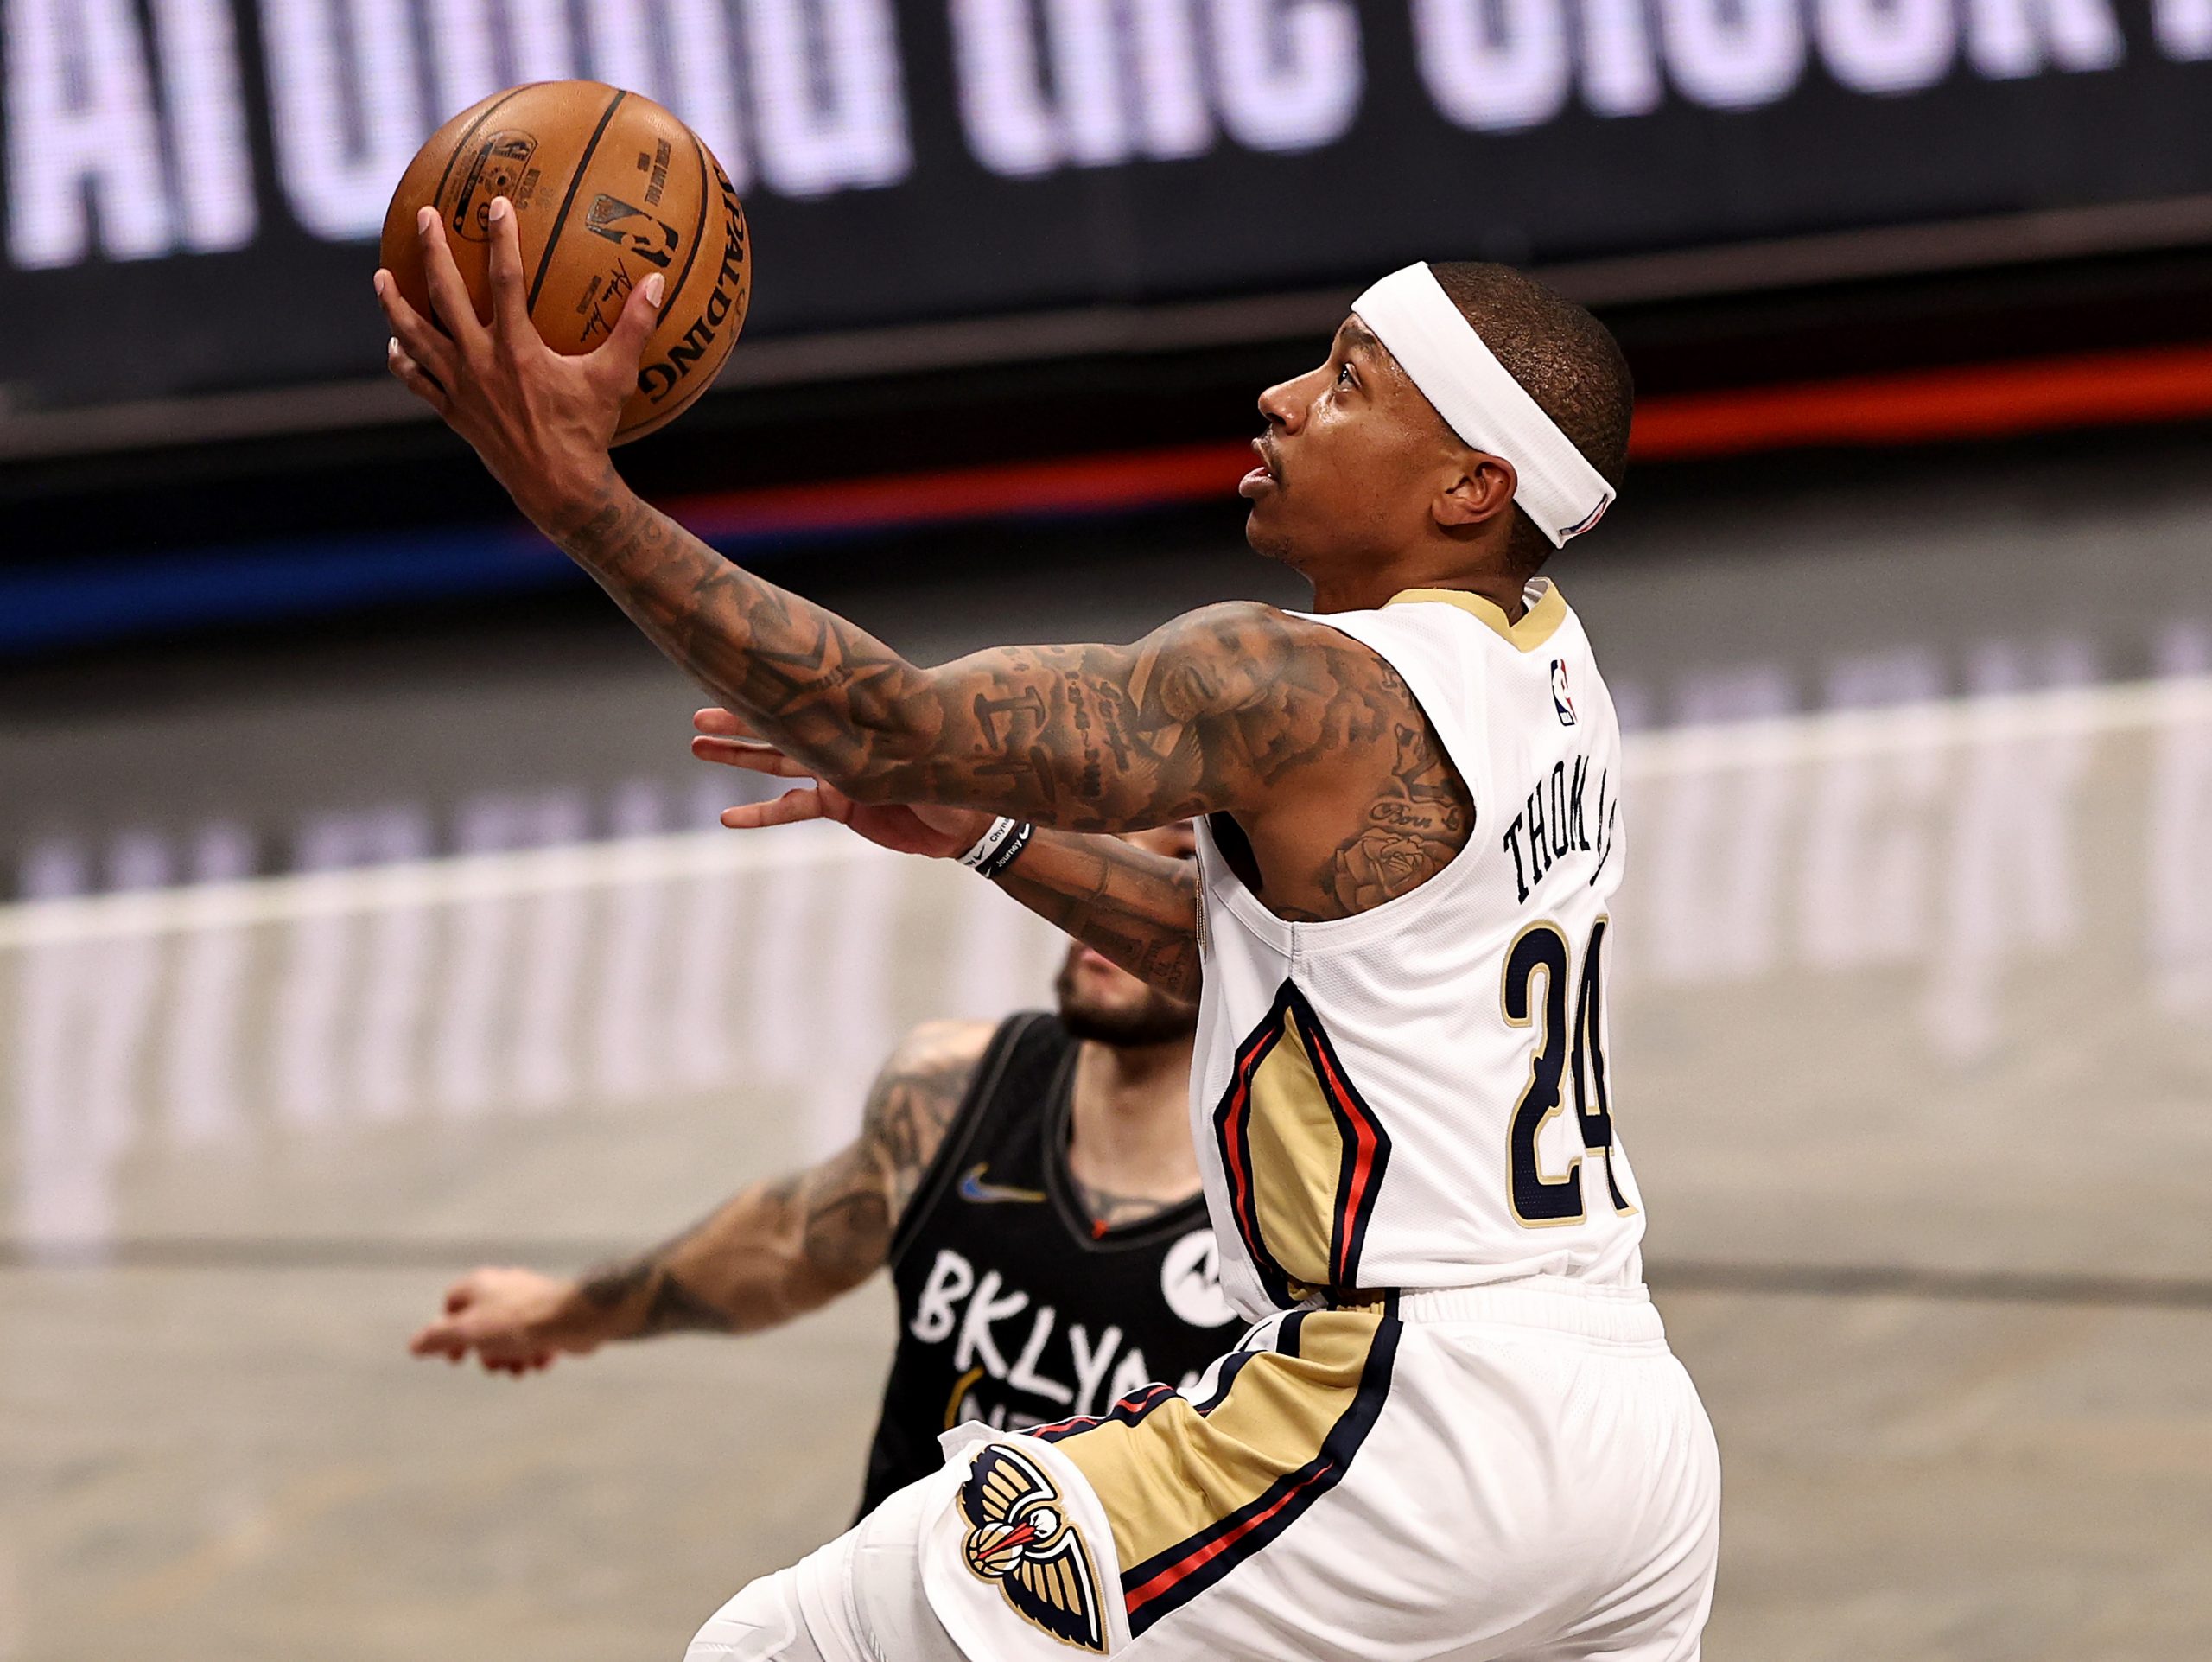 Isaiah Thomas of the New Orleans Pelicans drives to the basket.